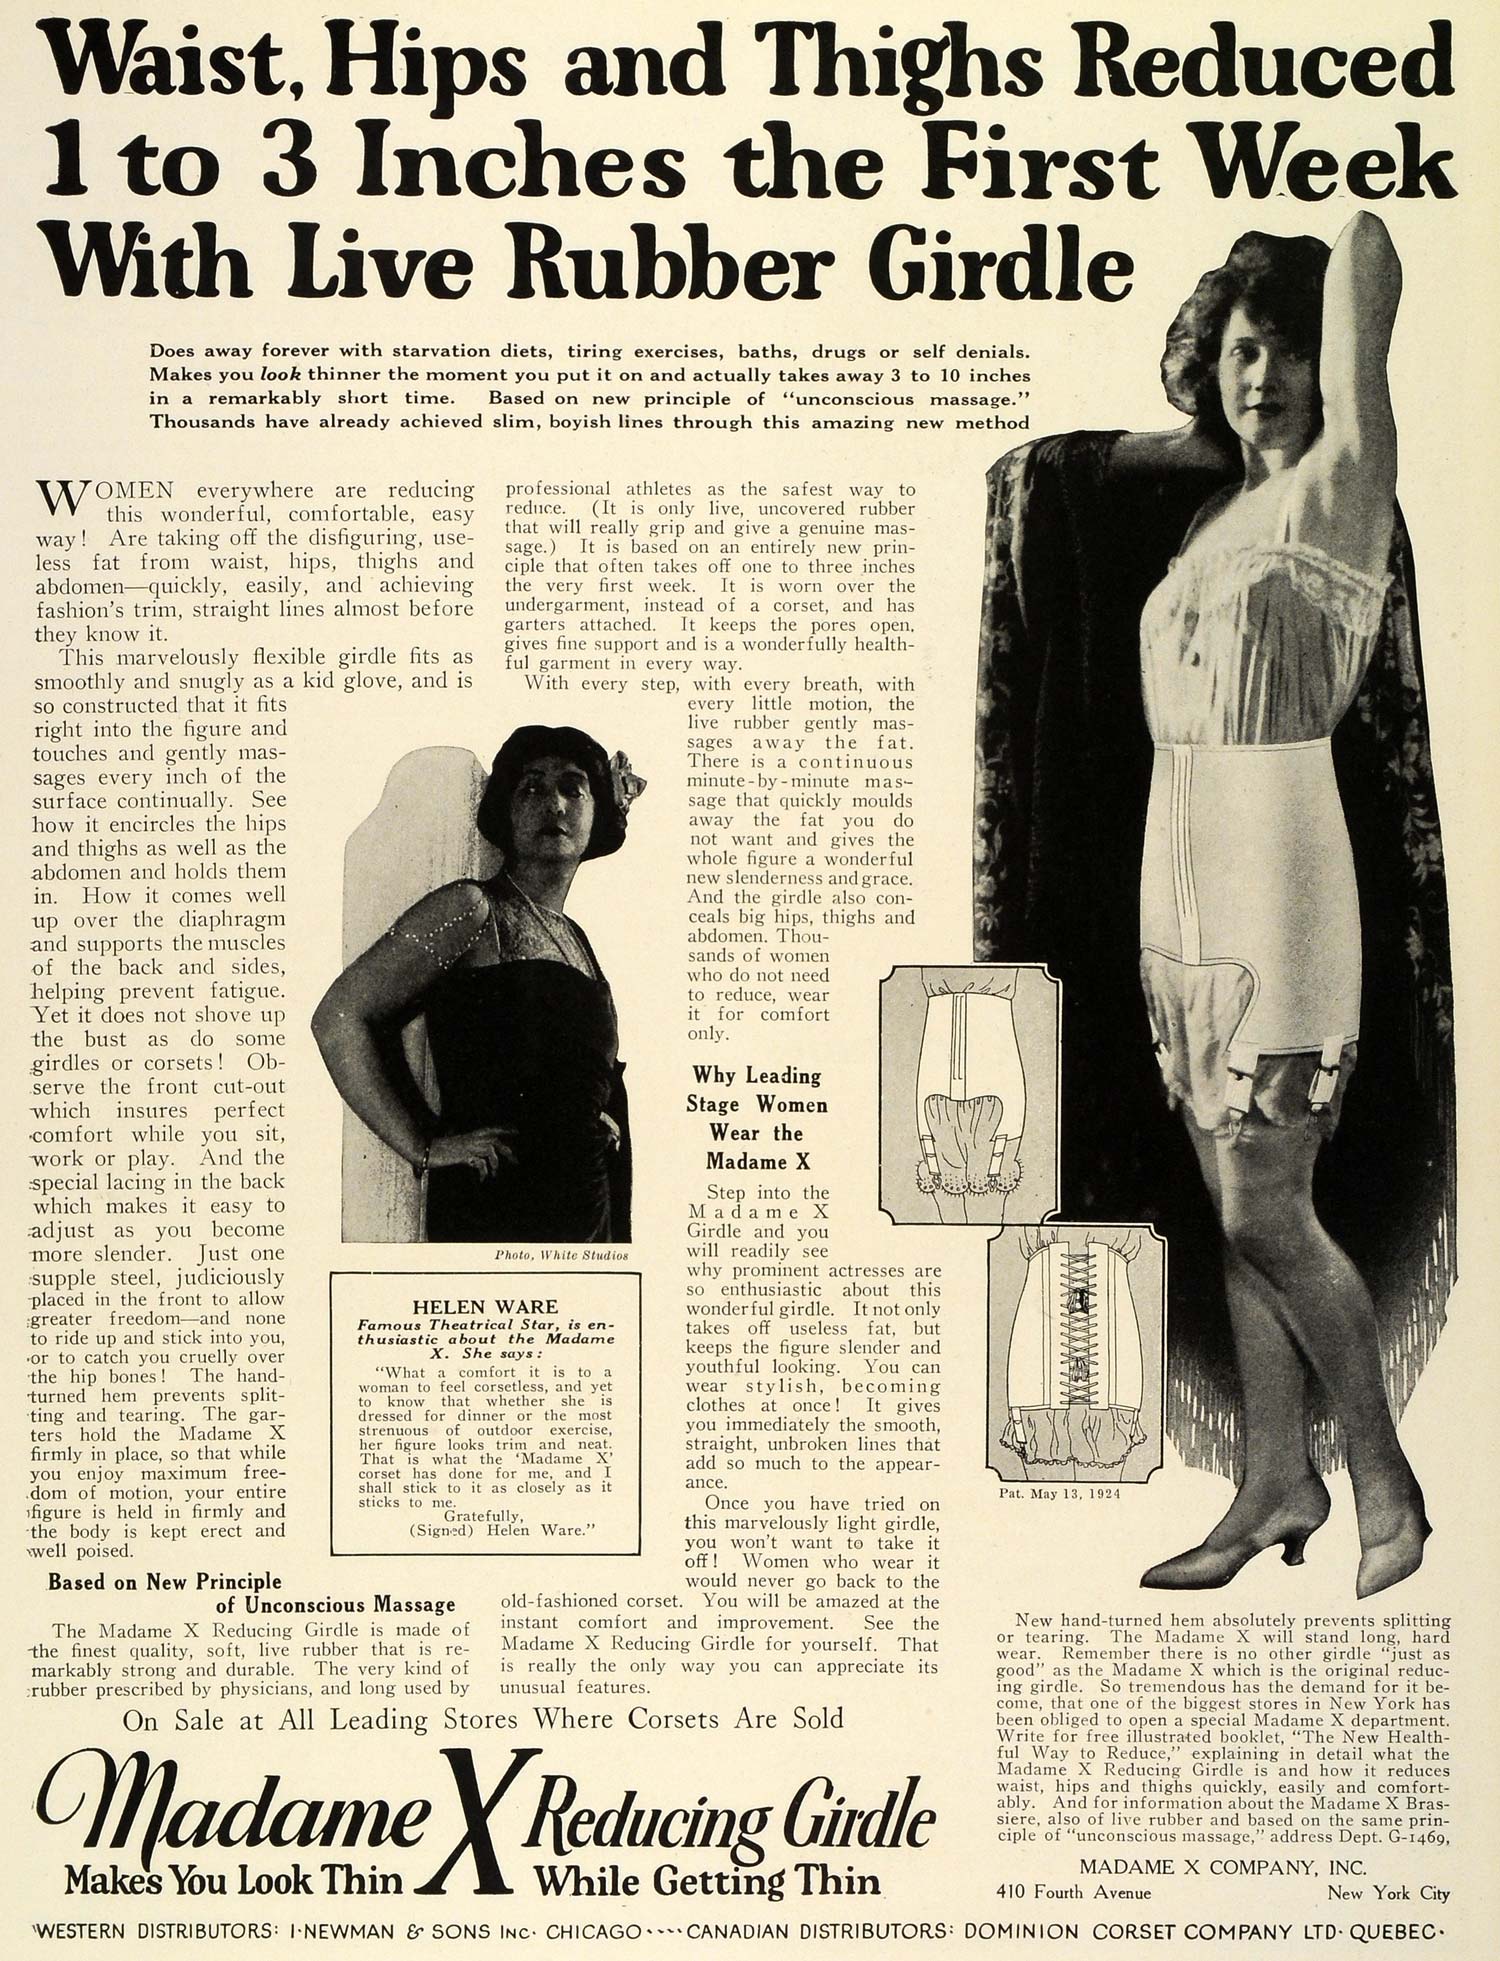  Reducing Rubber Girdle Celebrity Stage Film Actress Helen Ware